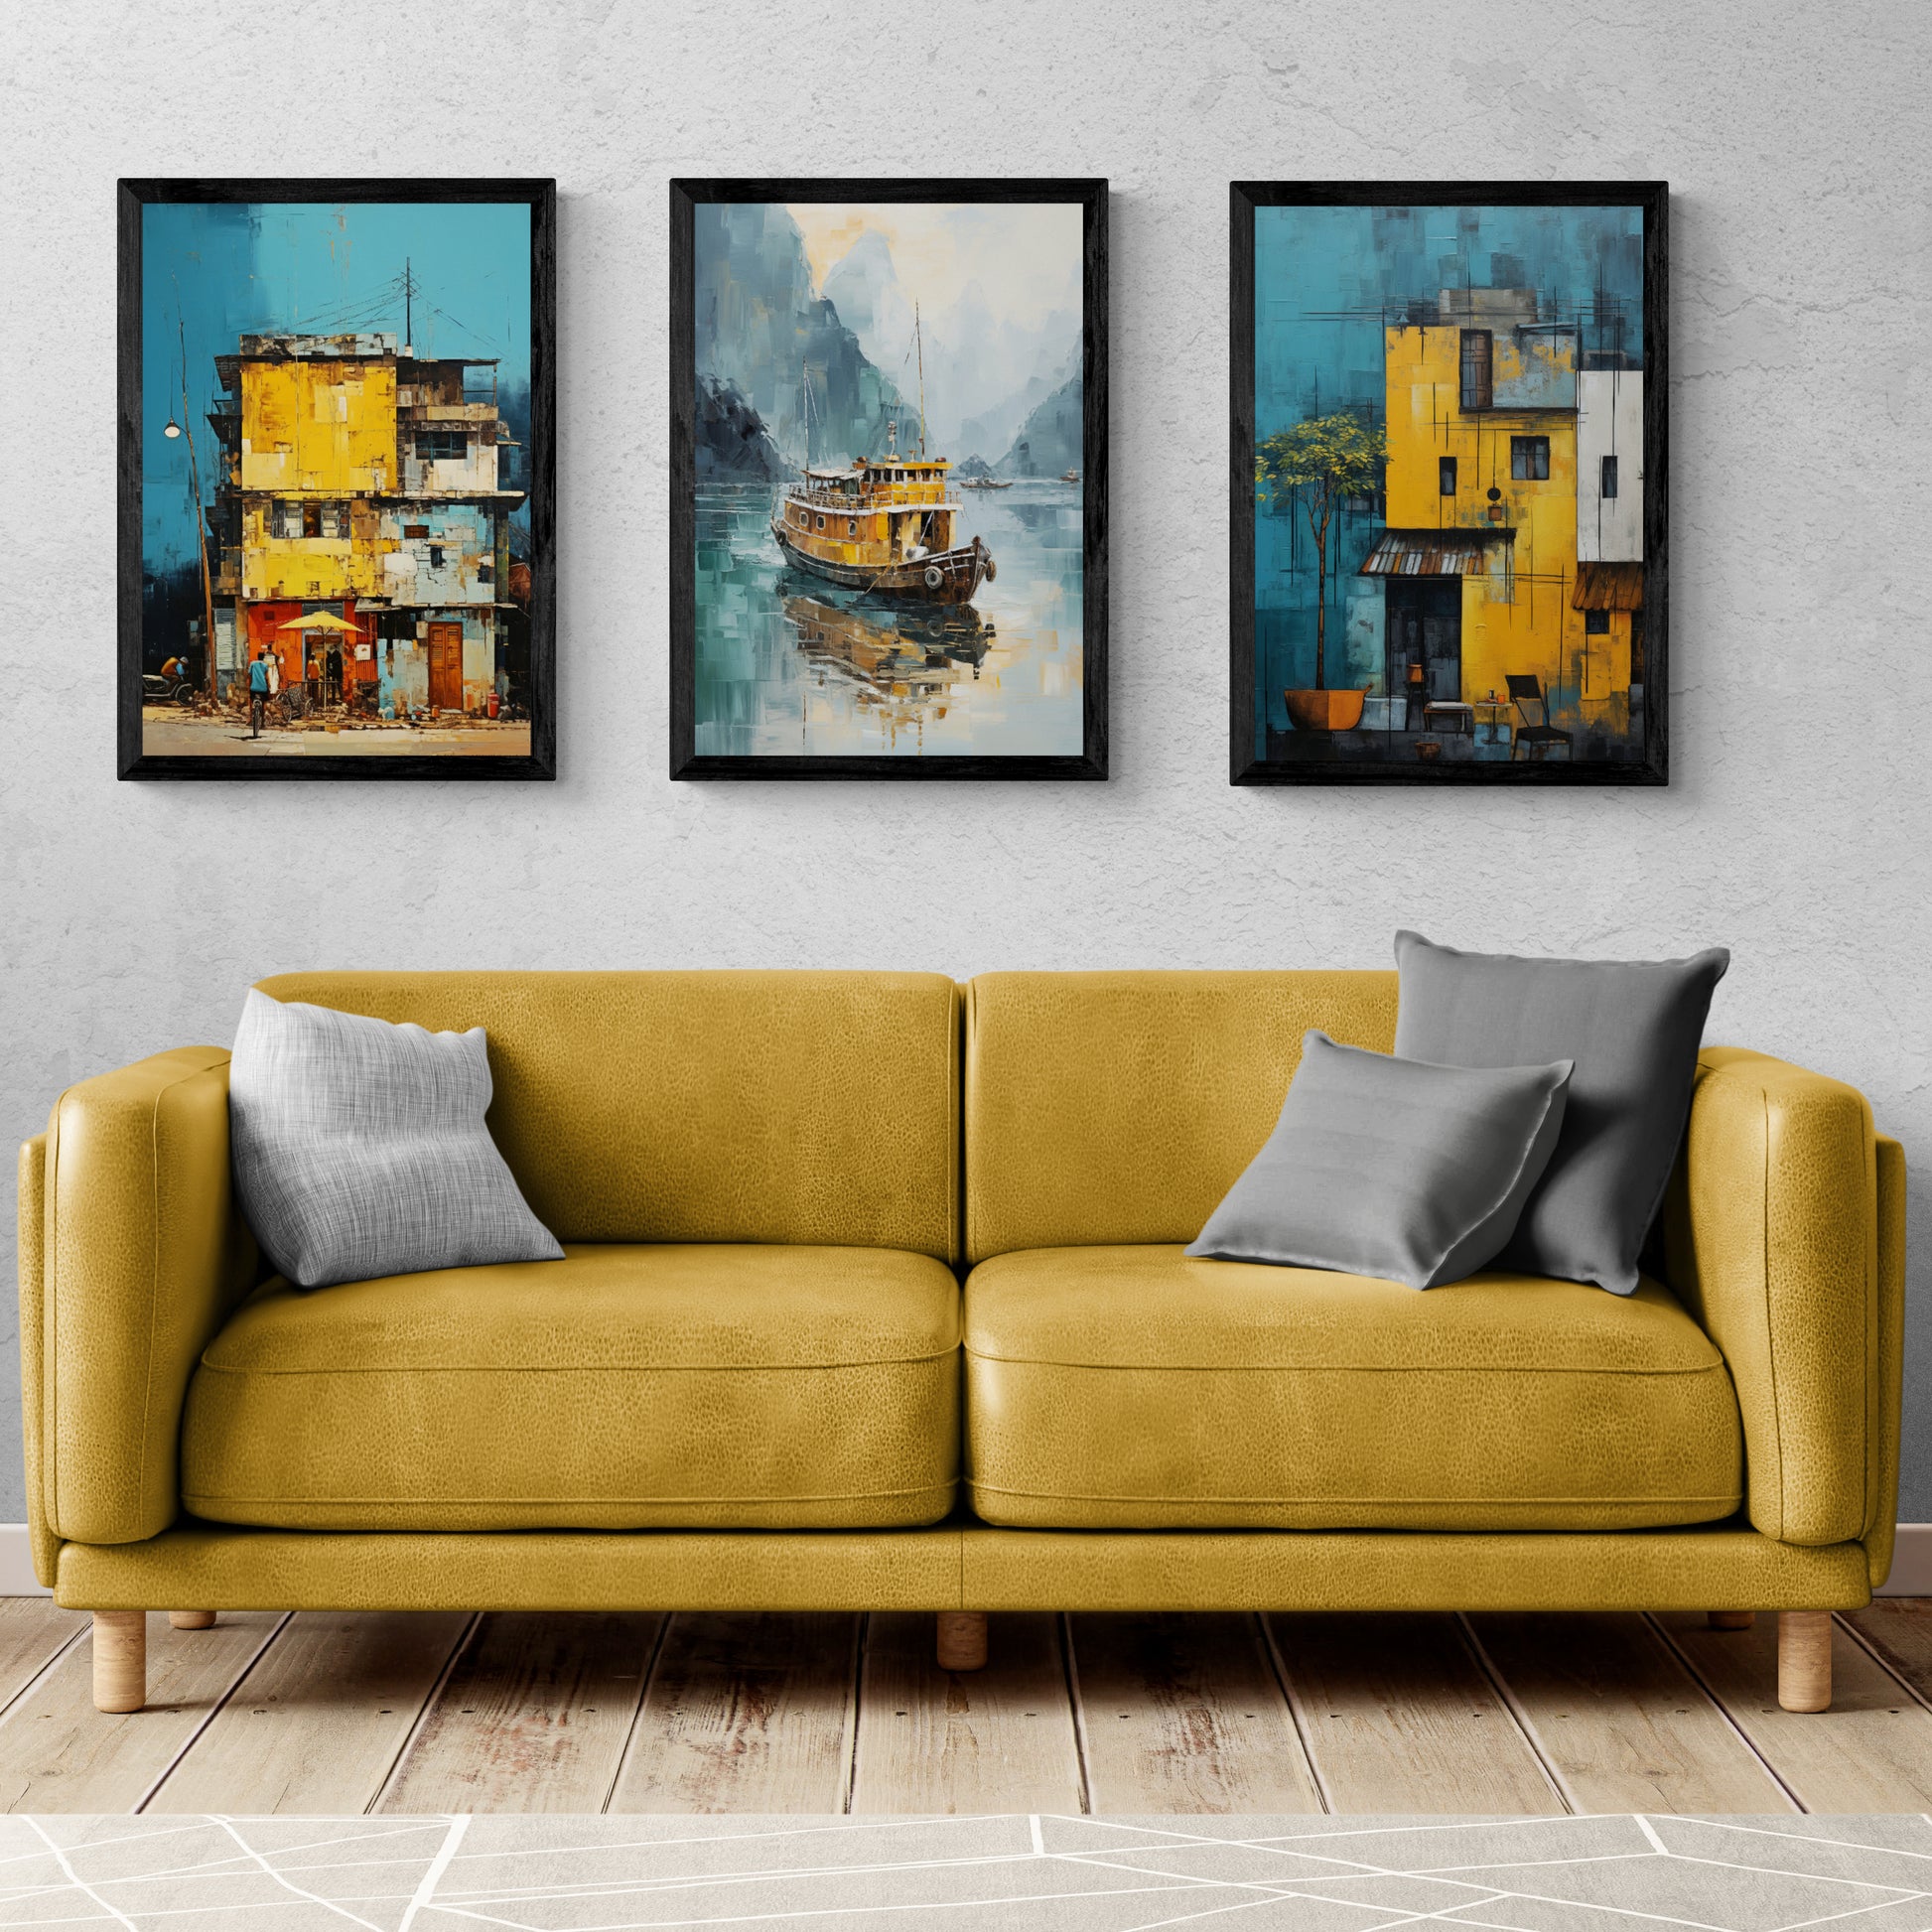 Vietnamese Abstract Set Living Room Wall Painting ( 14X18 inches each)